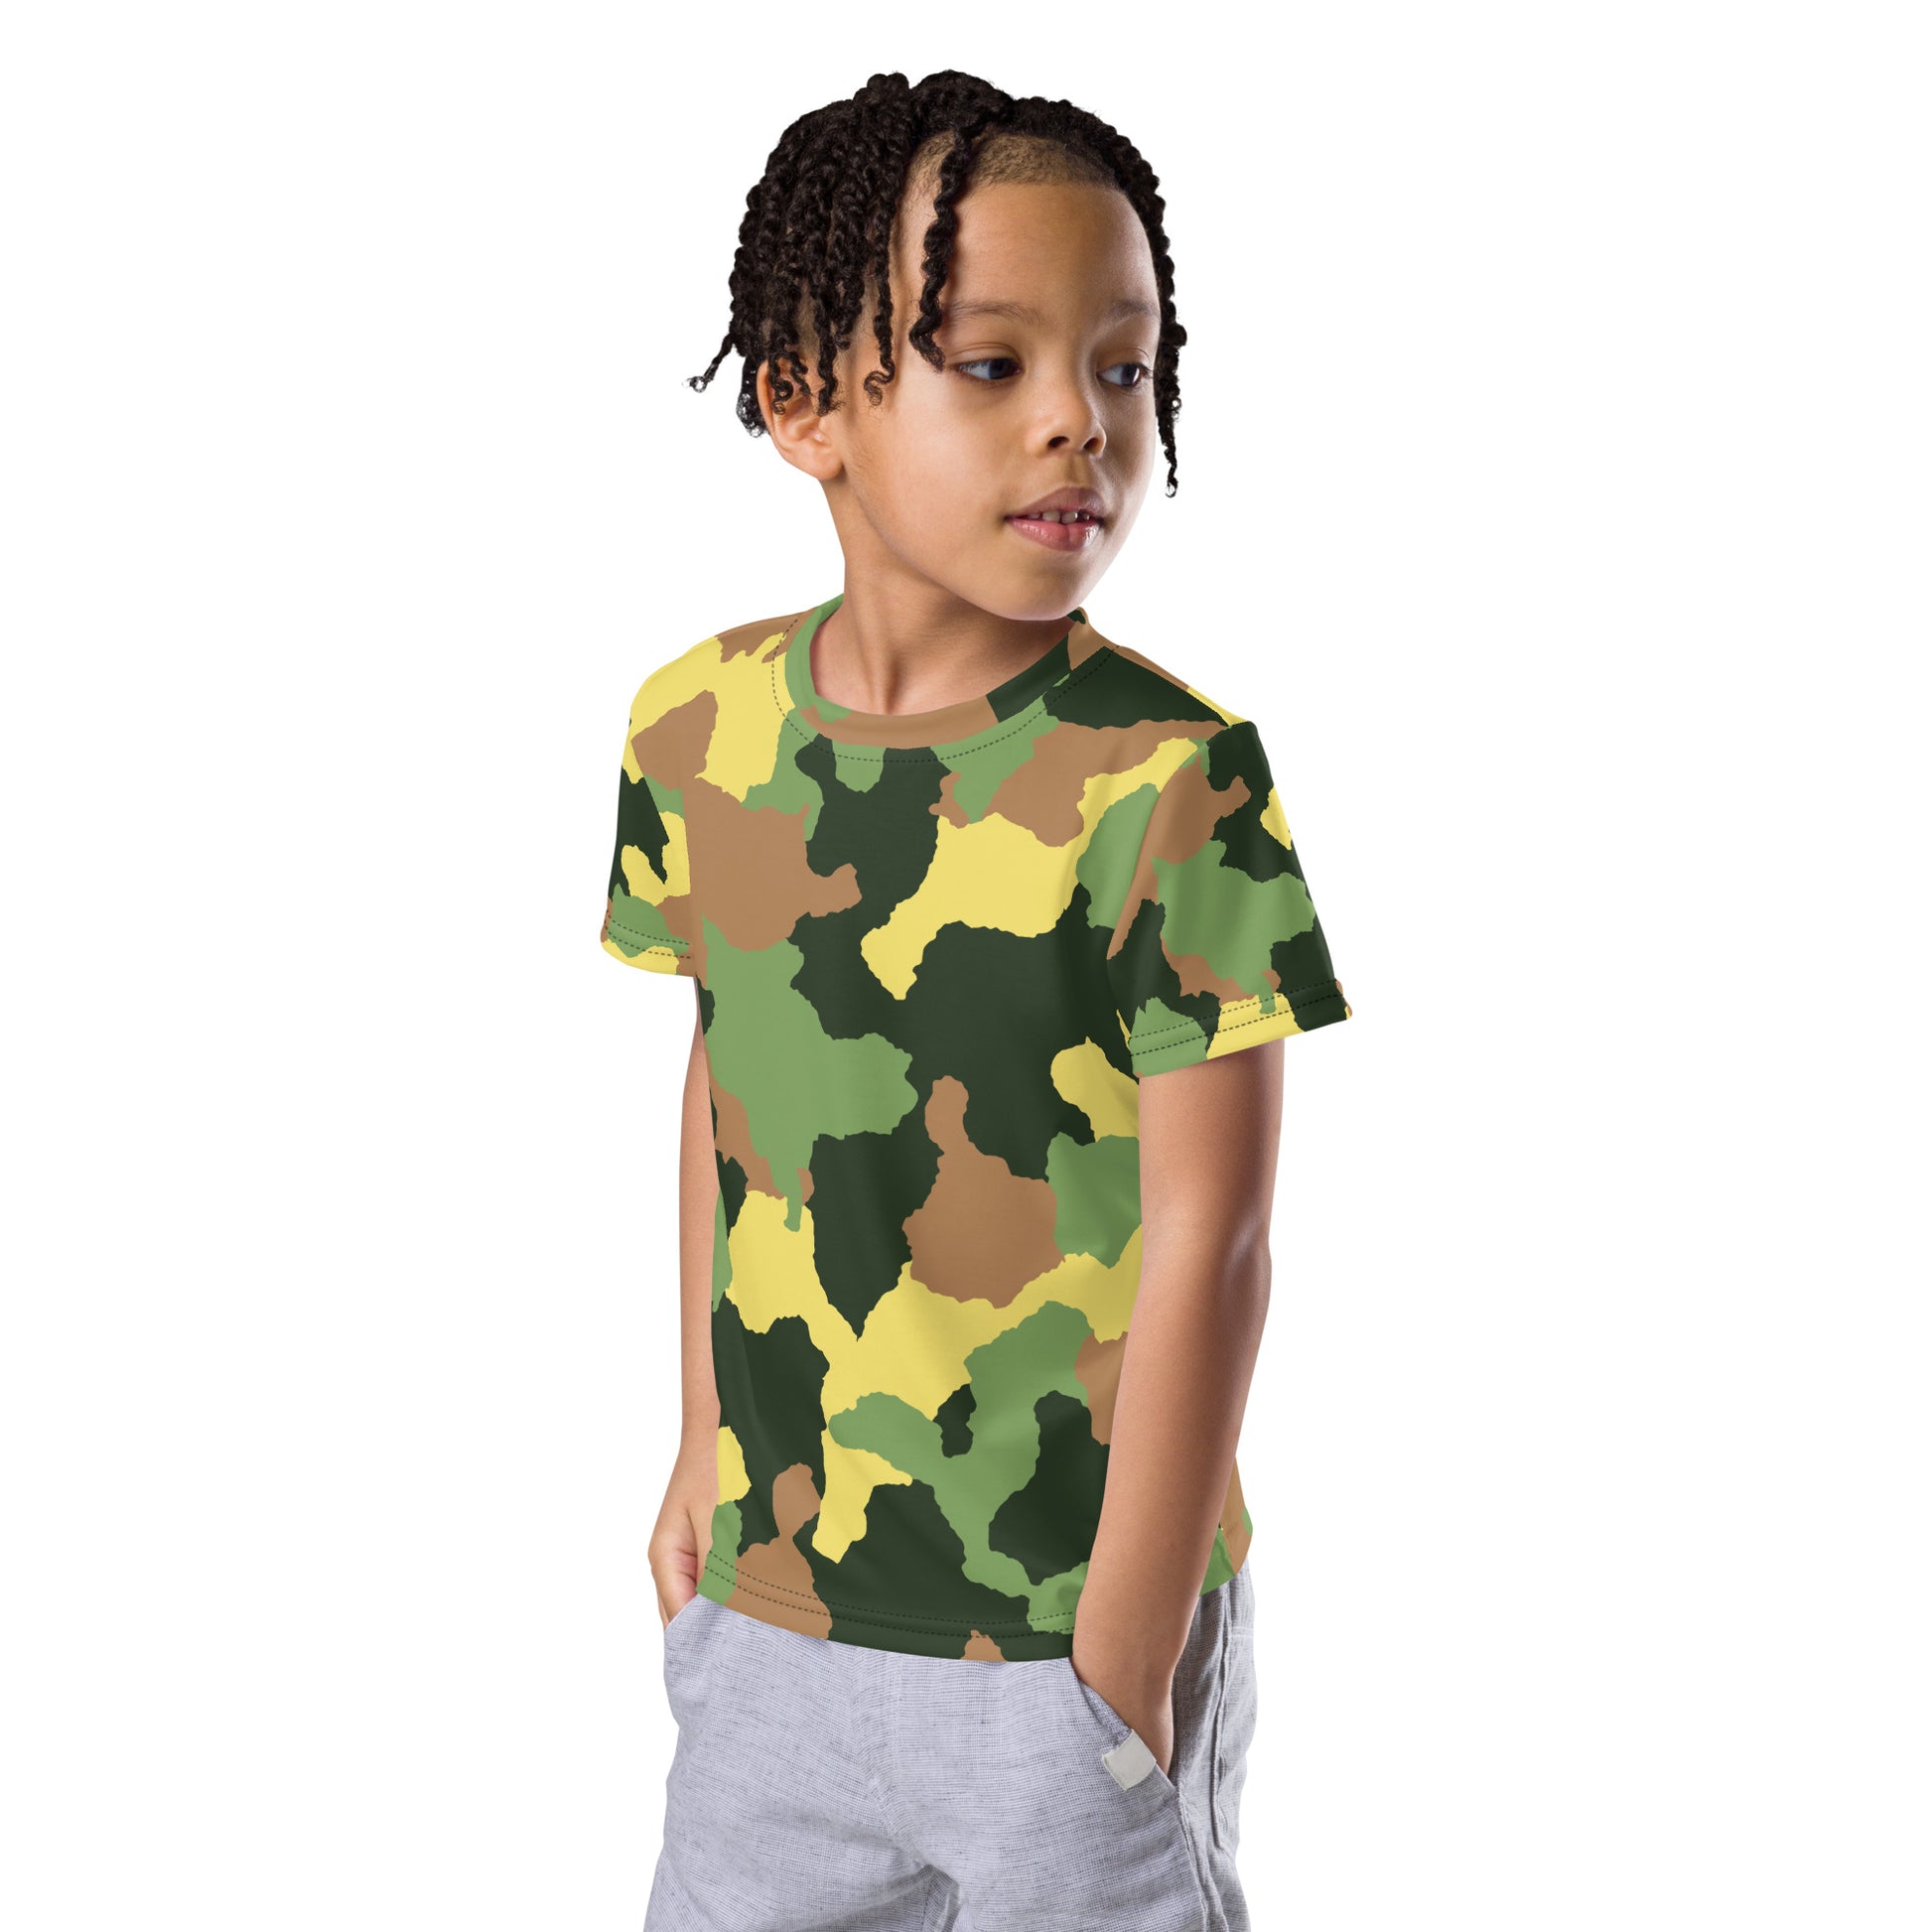 Kid with a T-shirt with a Army print